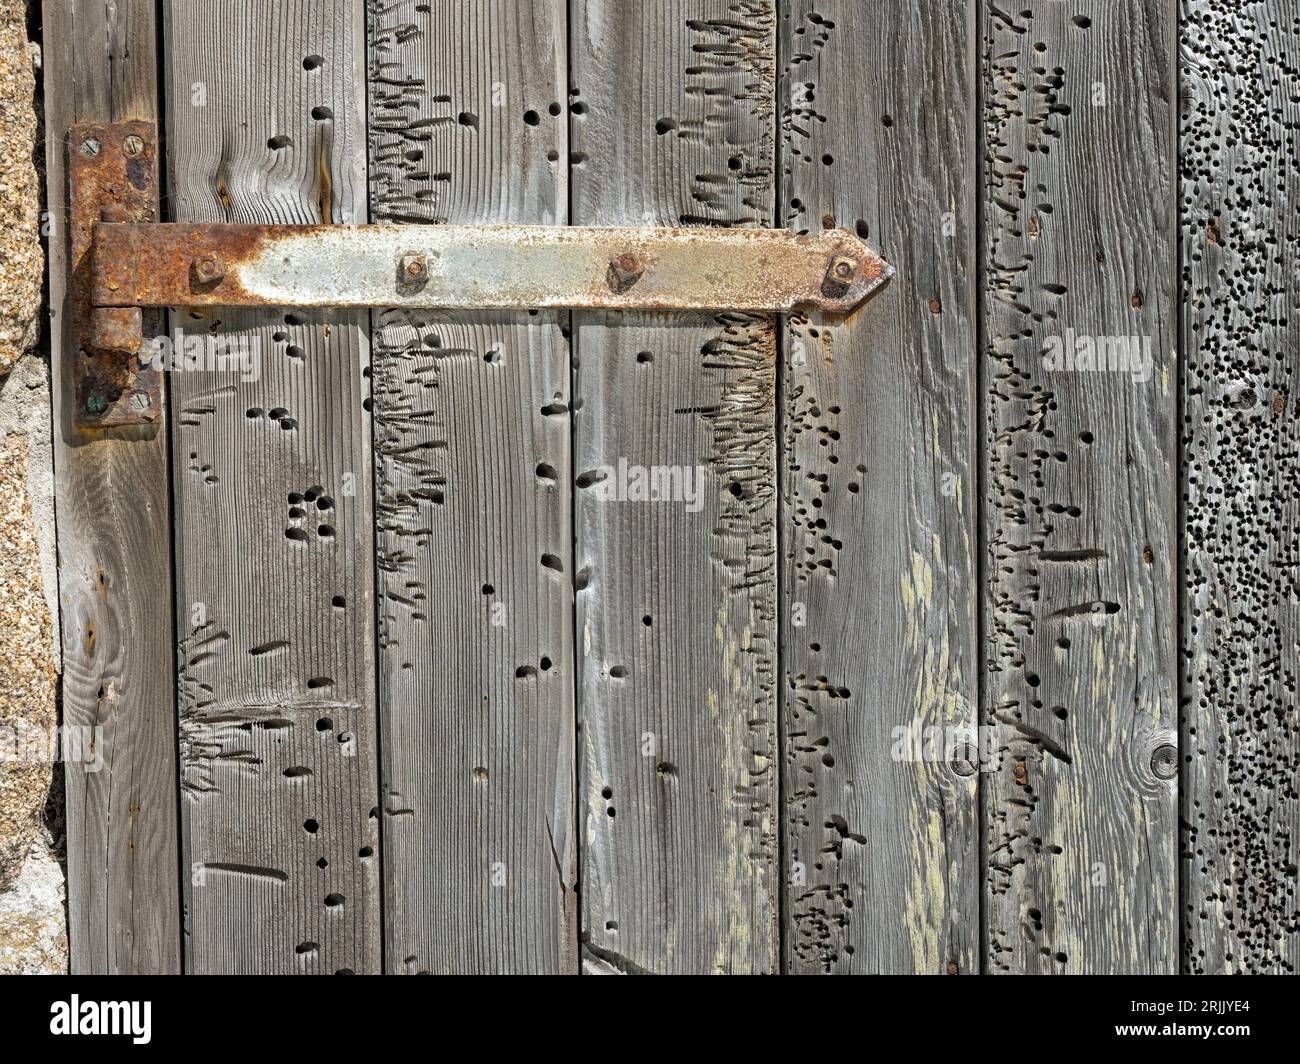 Shed door made with wooden planks damaged by the Teredo worm (Teredo navalis), St Mary's. Isles of Scilly, Cornwall, England, UK Stock Photo